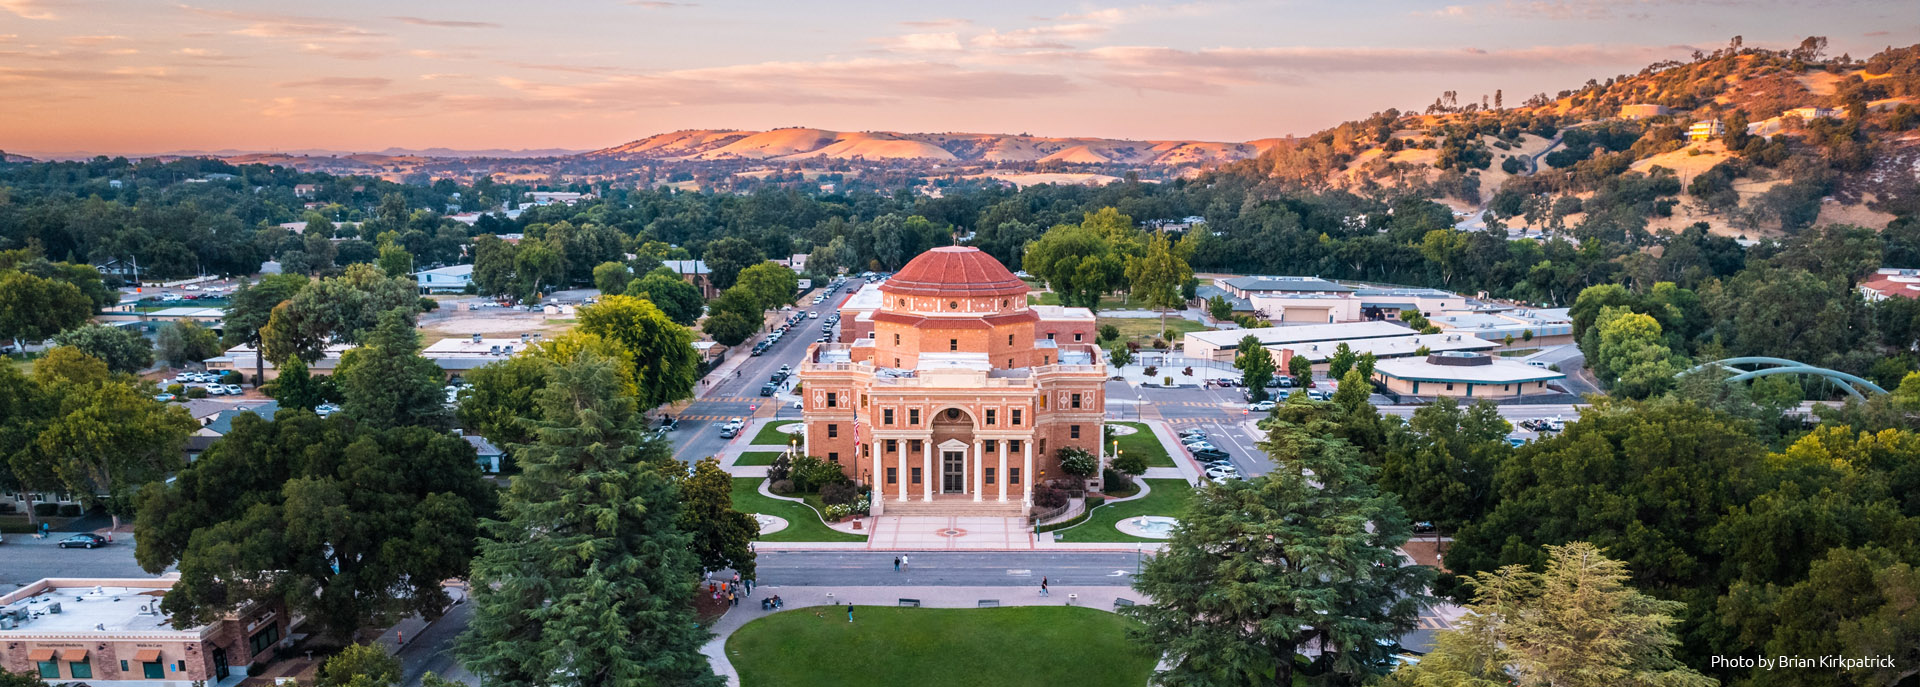 Arial shot looking down on Atascadero's Historic City Hall Building and surrounding downtown area with hills and an orange cast sunset in the background.